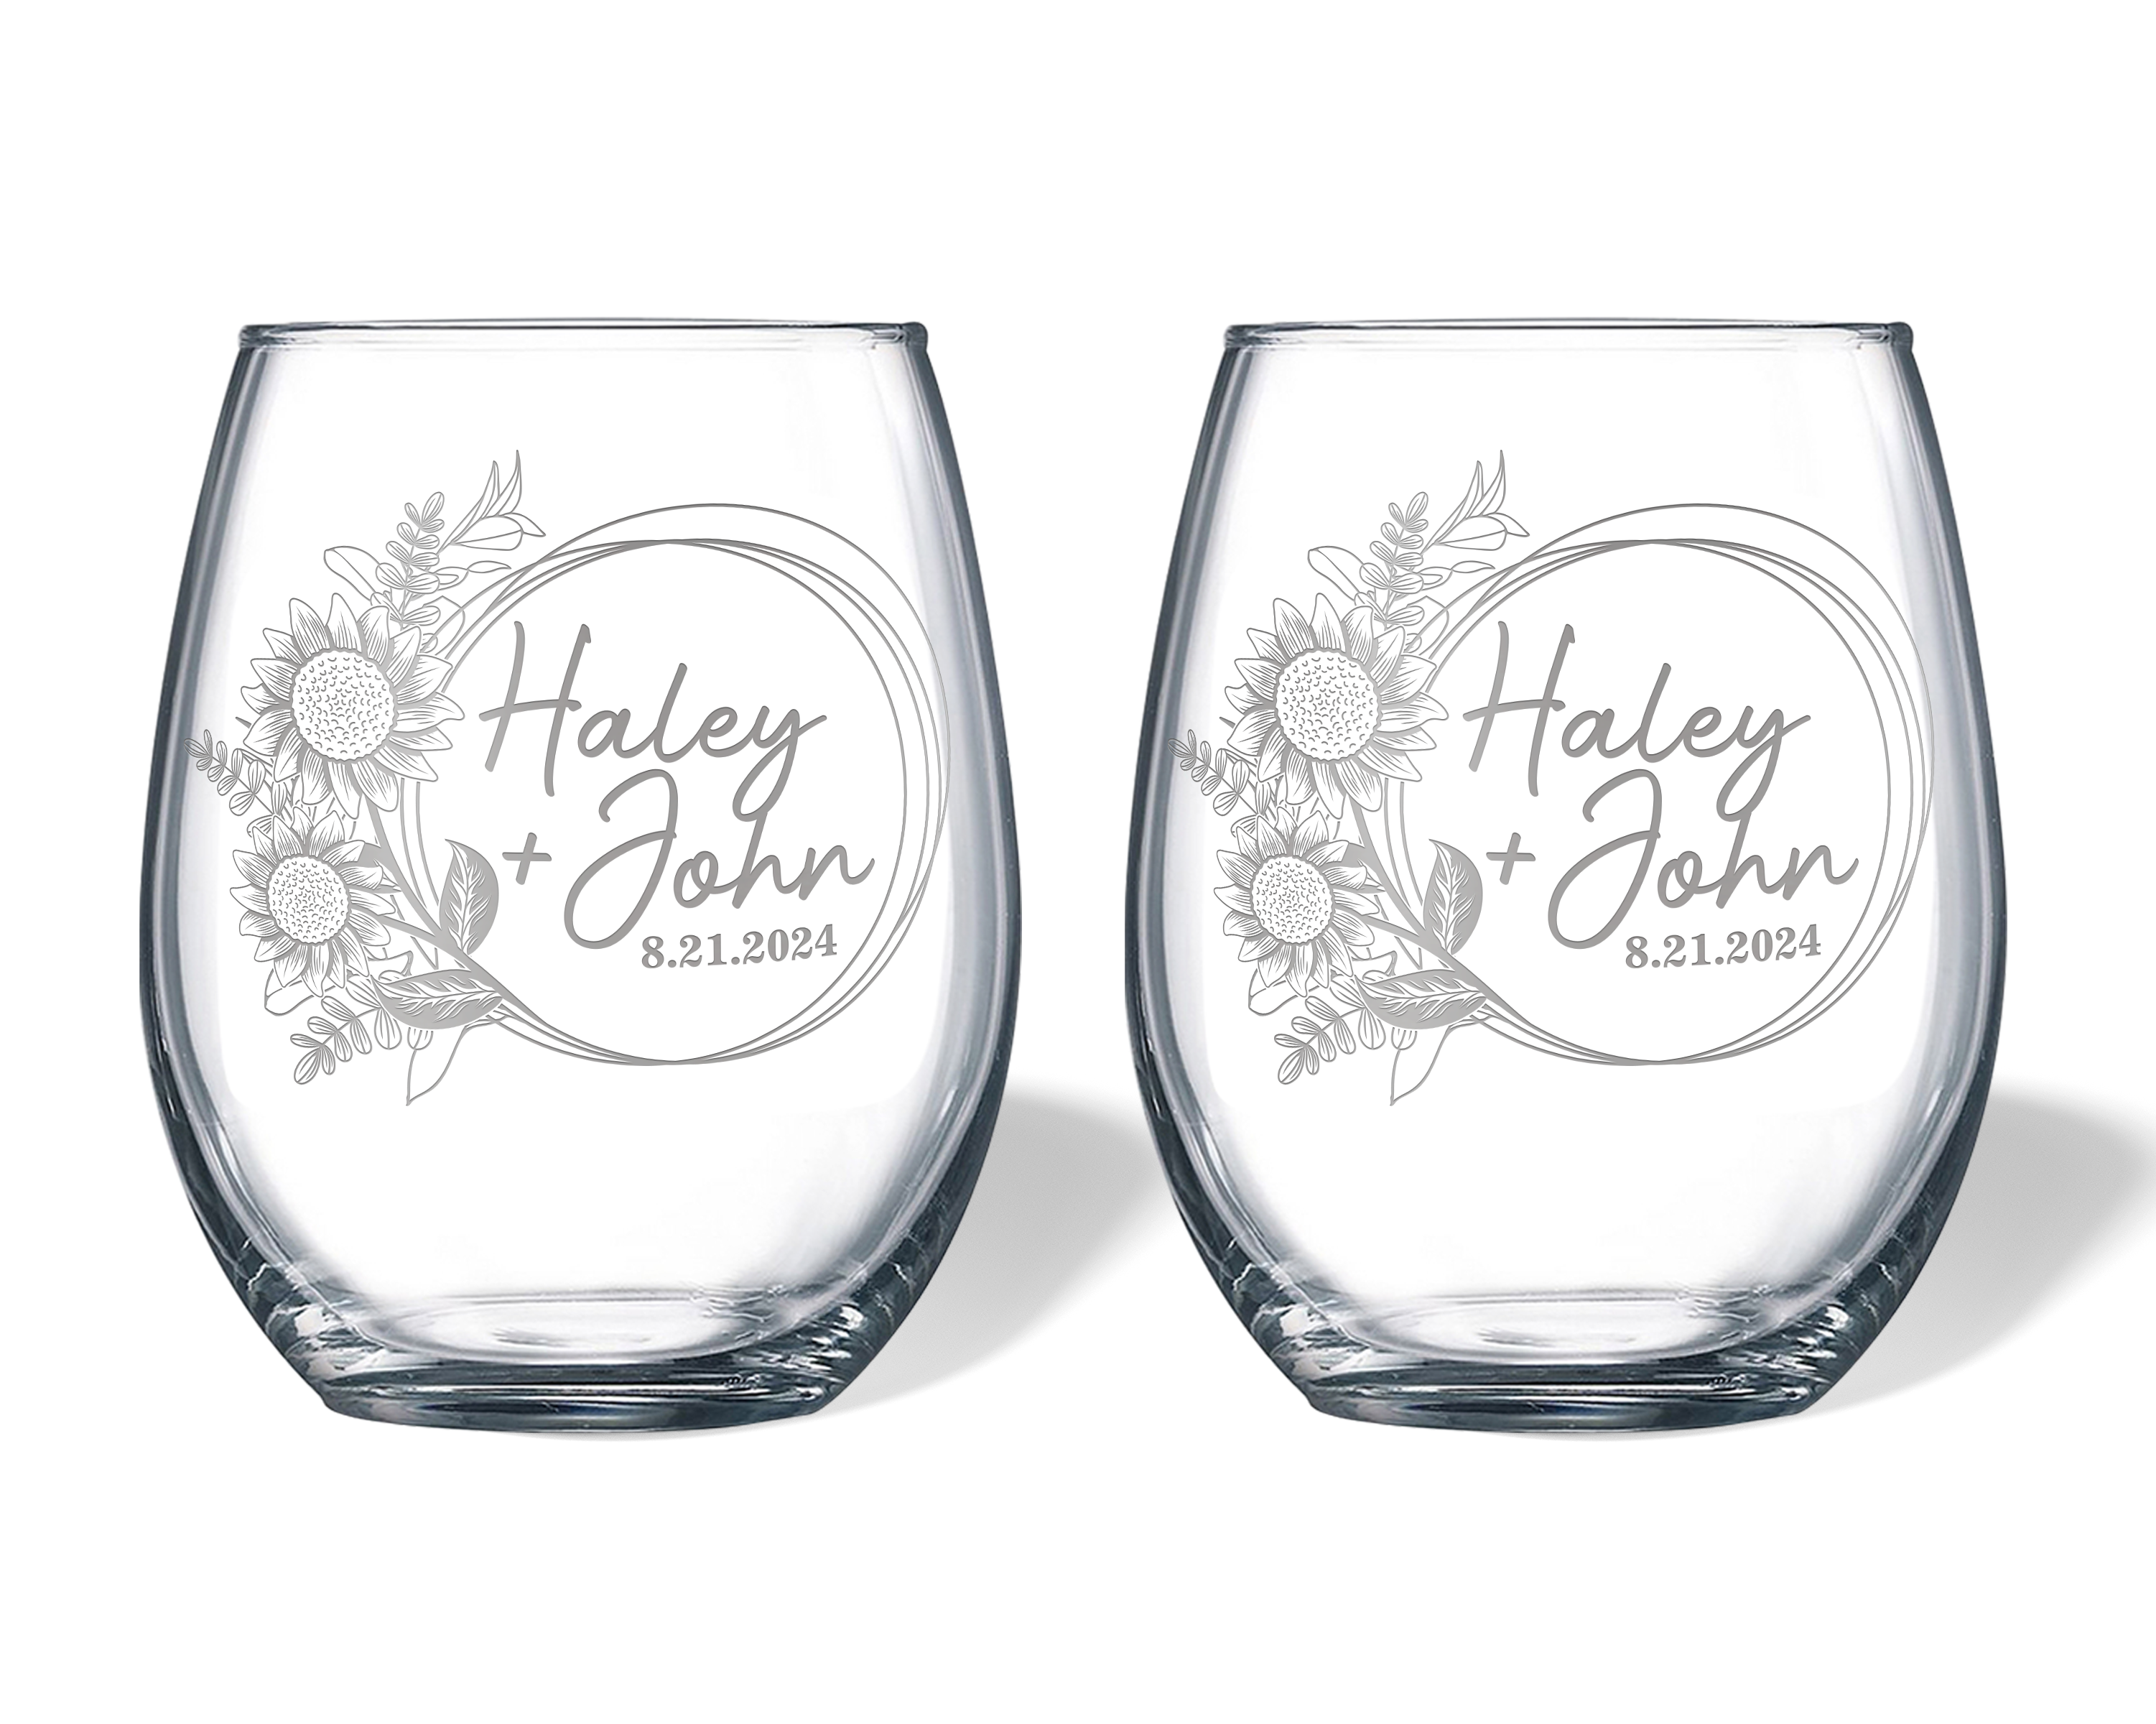 Wedding Ring Wine Glasses - Set of 2 - Personalized - Design Imagery  Engraving